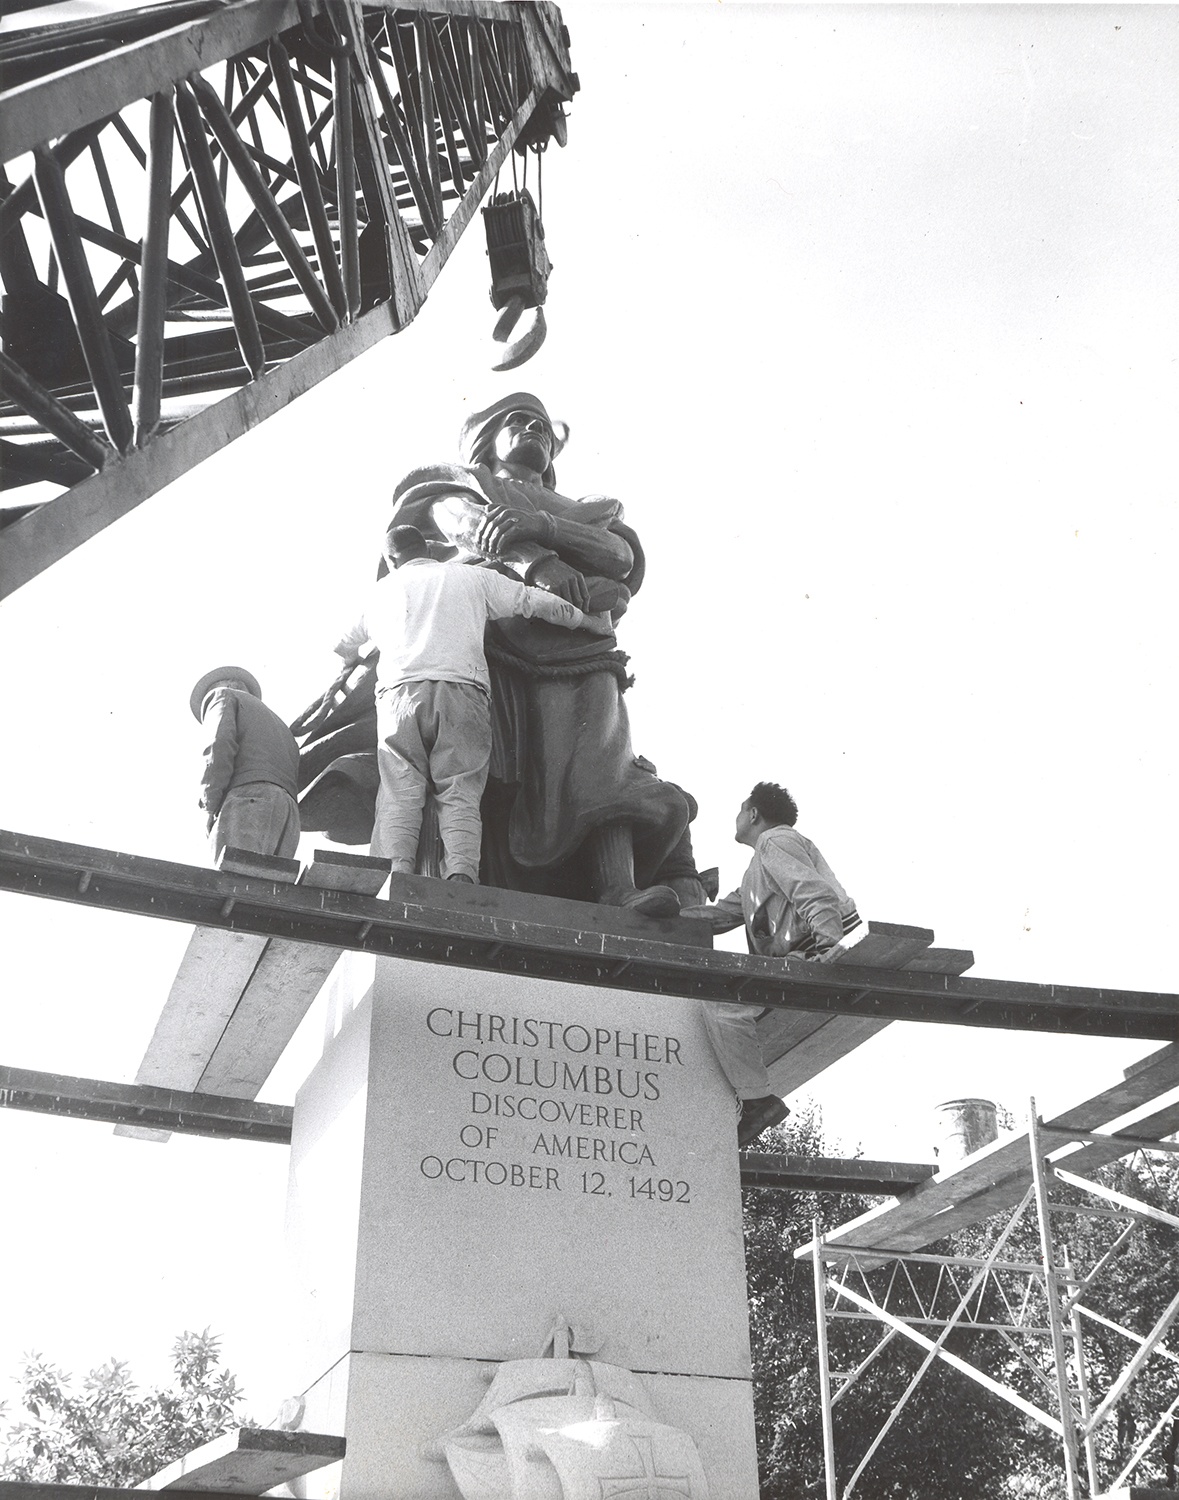 At the time of its dedication in 1958, Pittsburgh’s Columbus monument was the second largest in the country. Records in the collection show that the site for the statue in Schenley Park was secured in 1955, though community conversations around the project had been going on for decades. Gift of Joseph D’Andrea